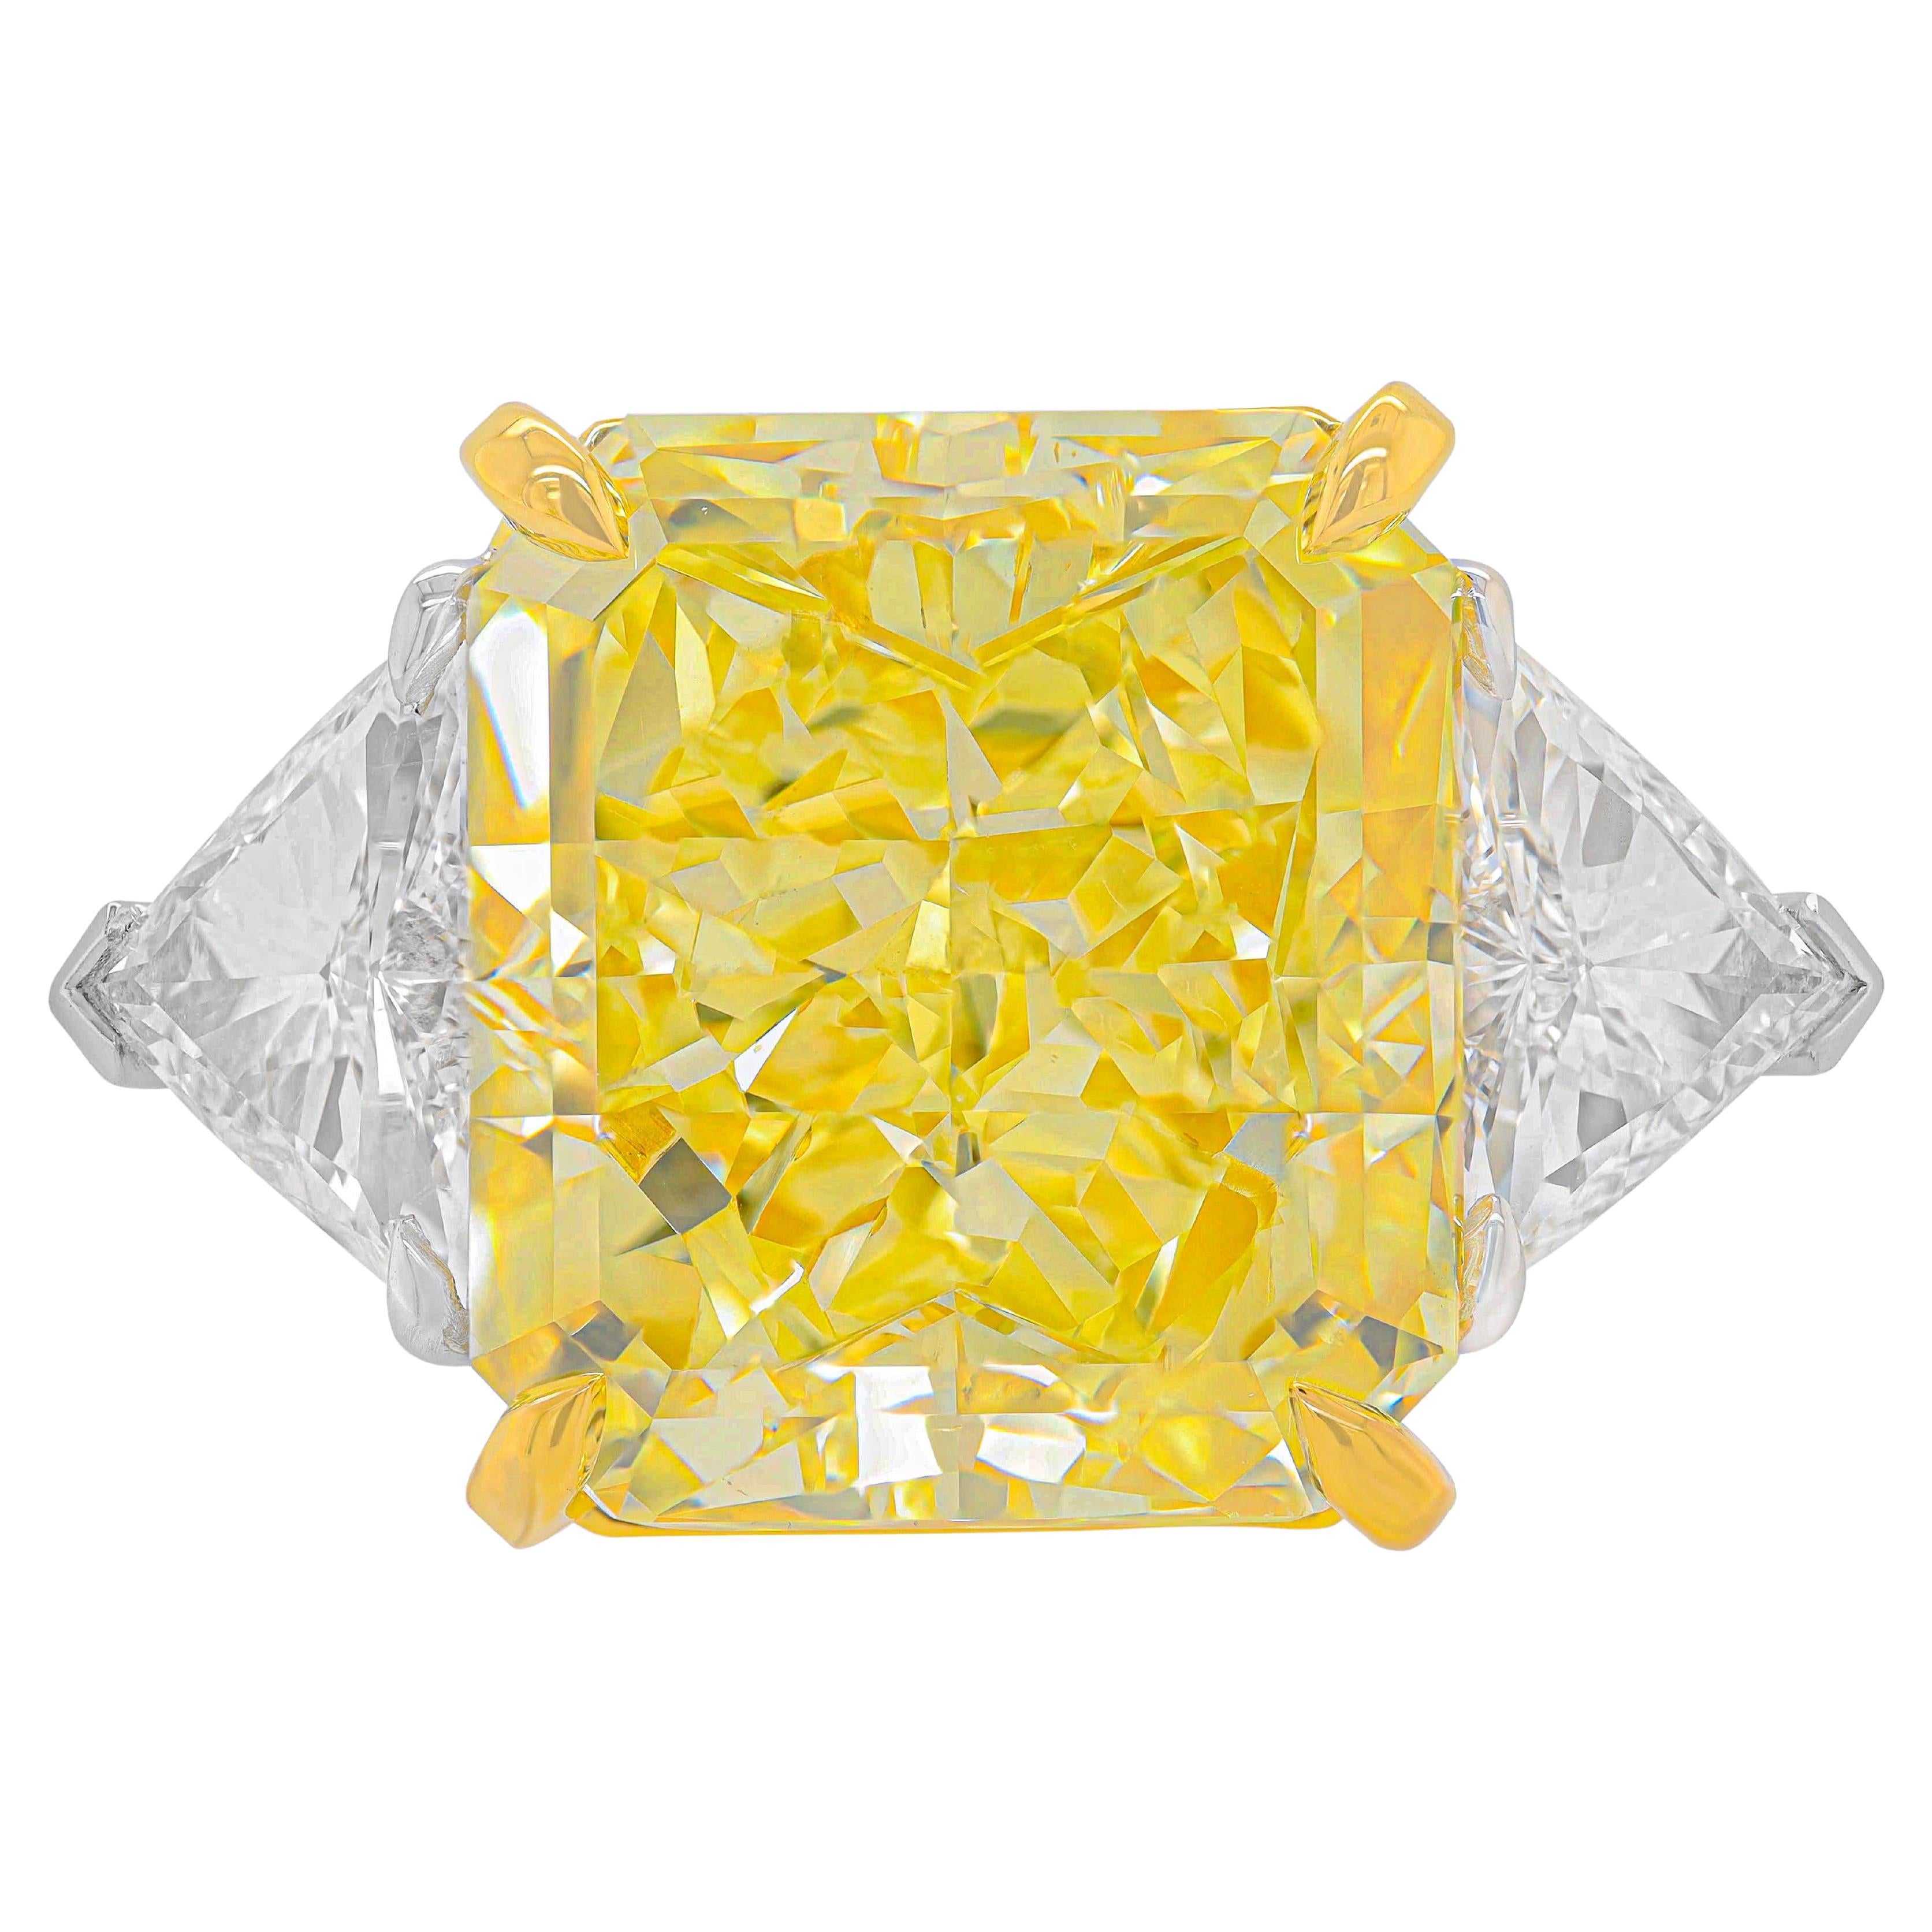 Diana M. Fancy Intense Yellow Diamond 23.88cts VS2 Set with 2cts Trillions GIA